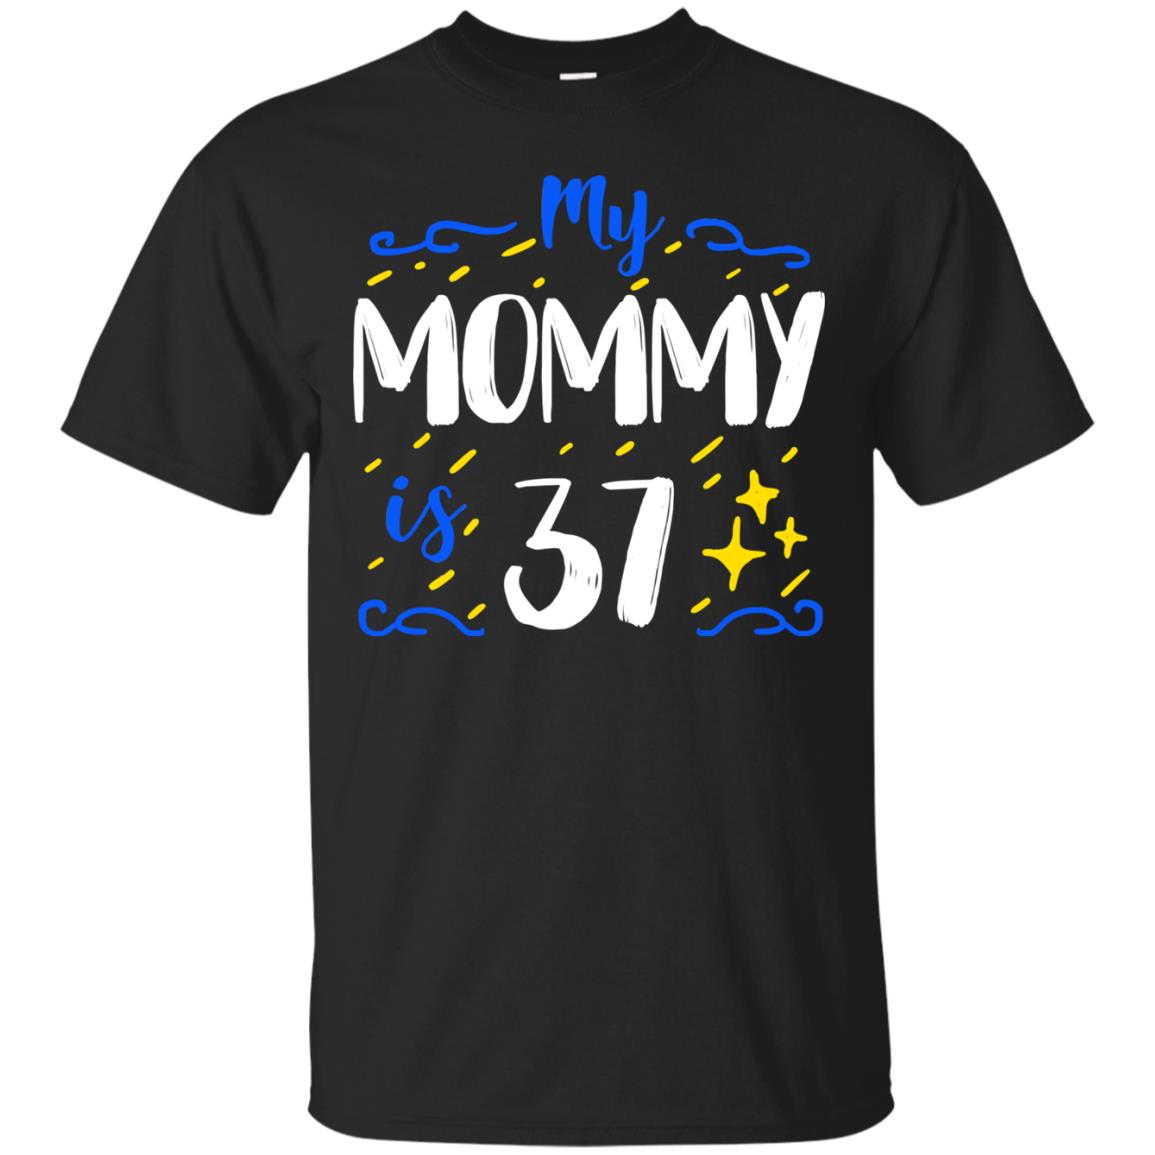 My Mommy Is 37 37th Birthday Mommy Shirt For Sons Or DaughtersG200 Gildan Ultra Cotton T-Shirt